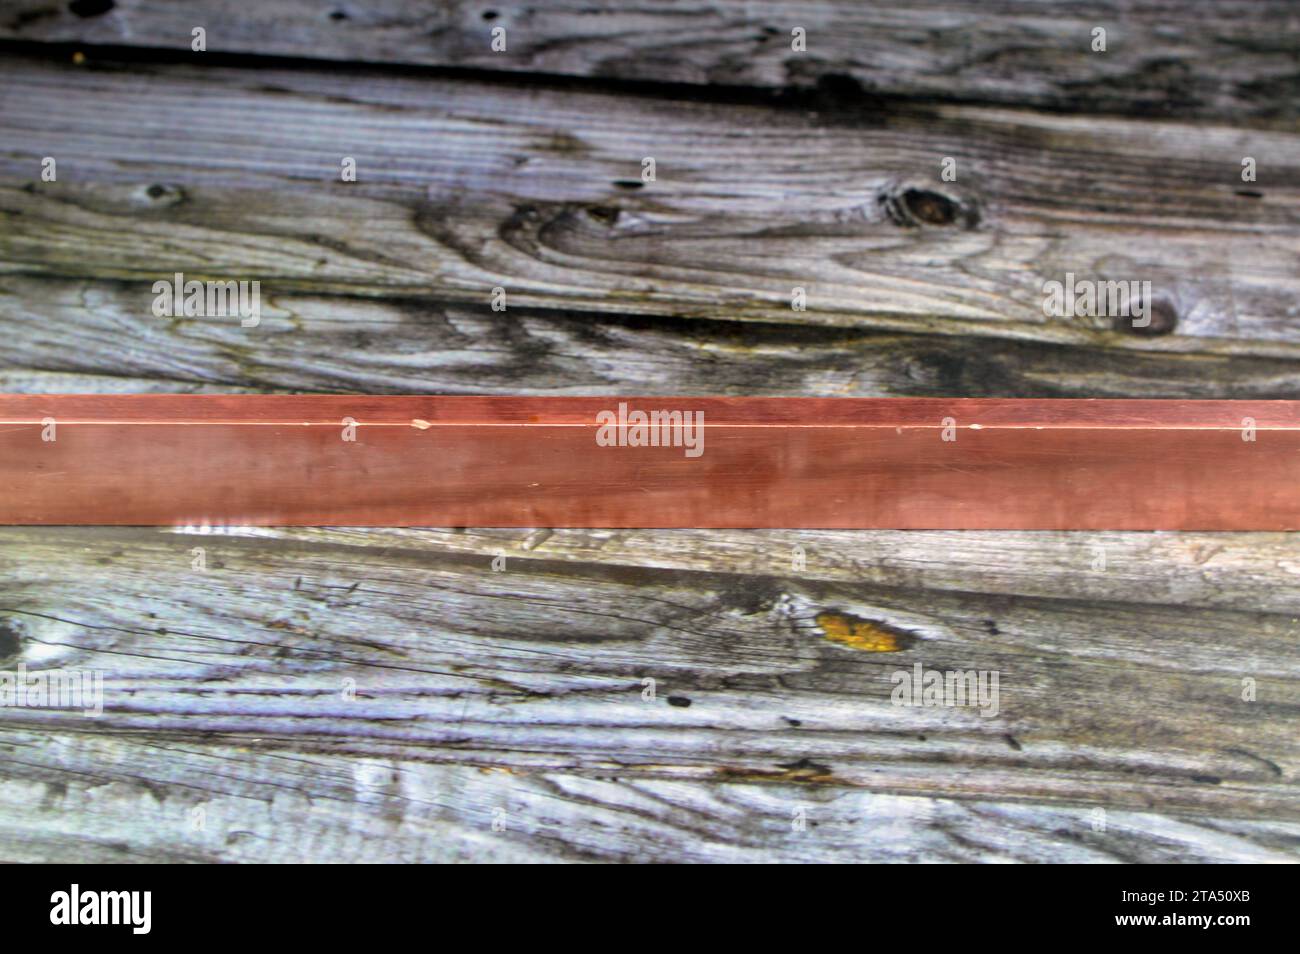 Long heavy copper bar, Copper is a mineral, an element and a metal, used in wiring, roofing, pipes, pots and pans, decorations and artworks, jewelry a Stock Photo